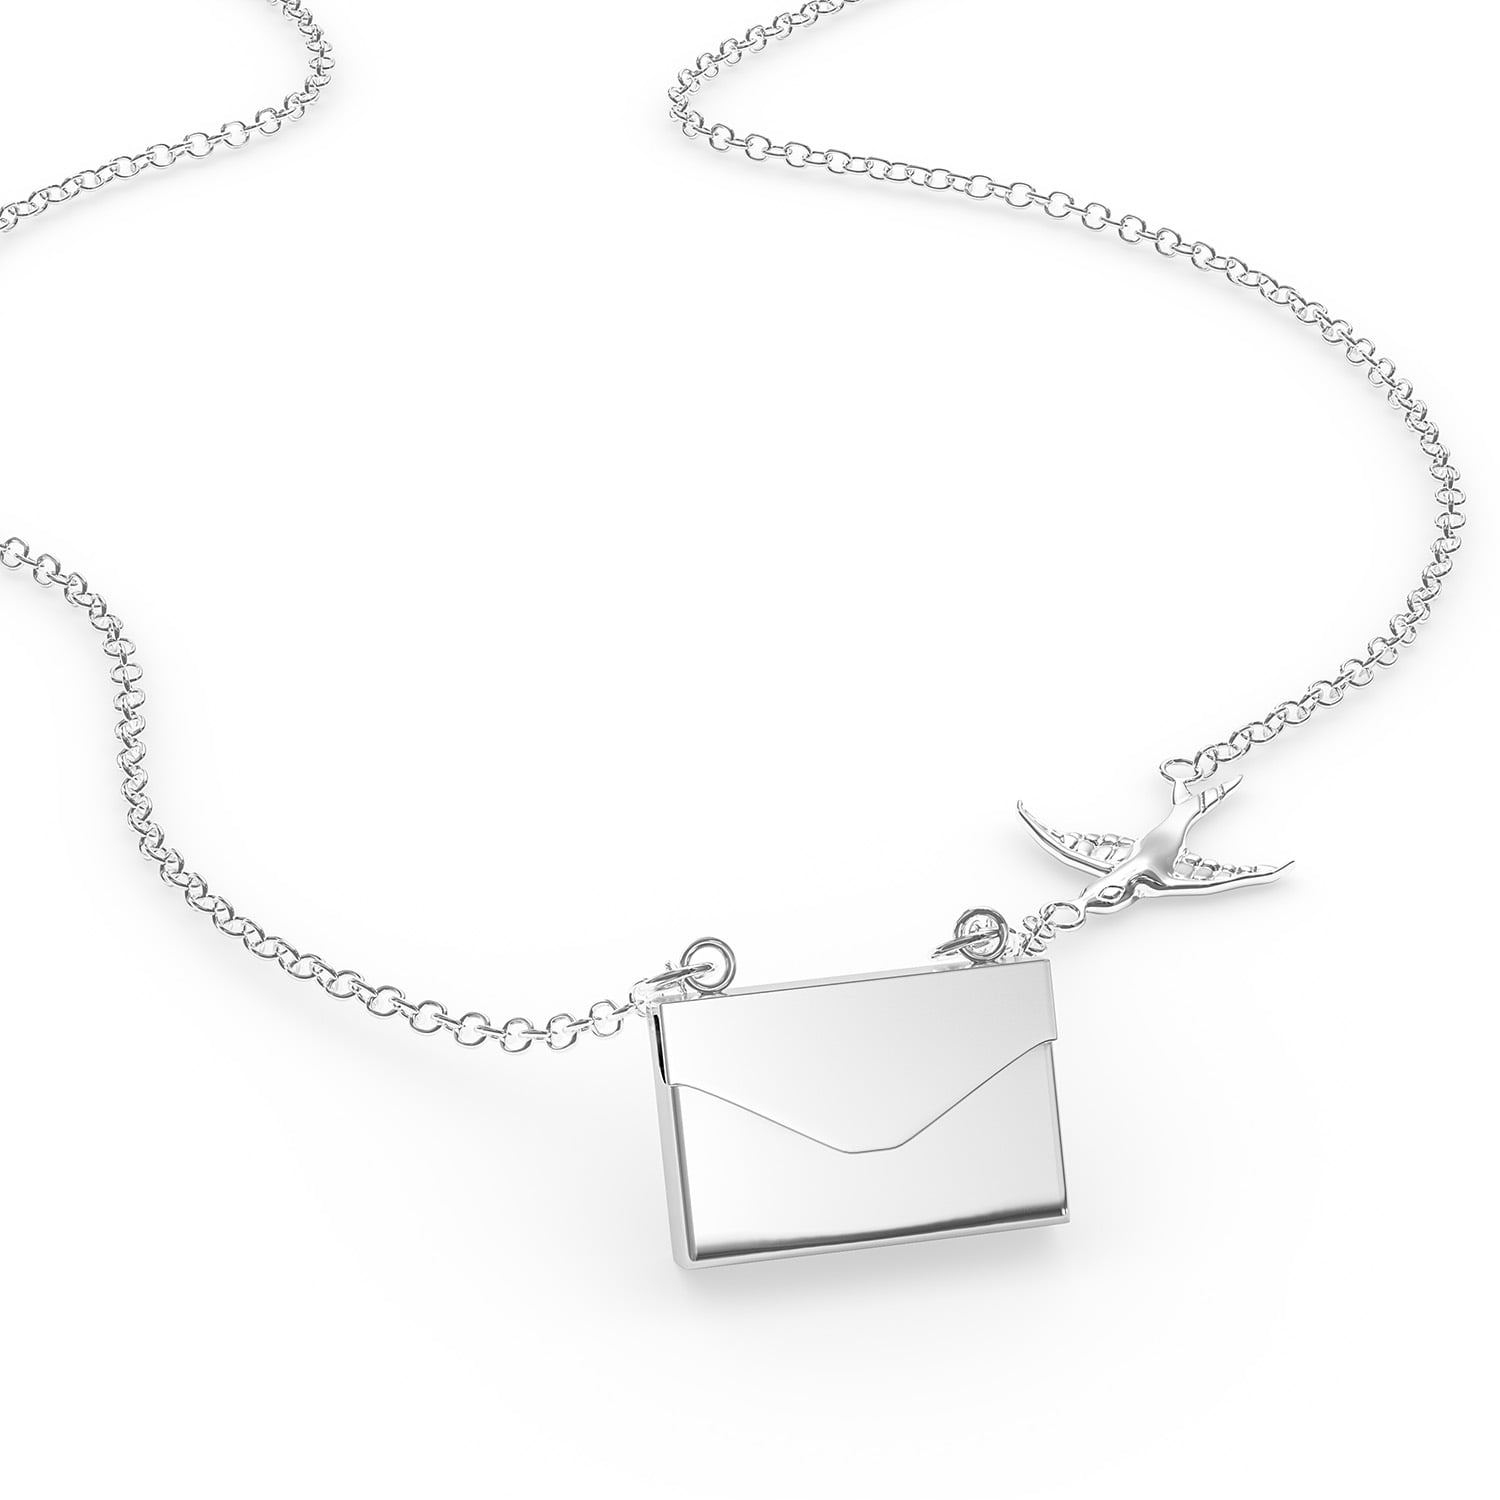 Cornish Sea Glass and Sterling Silver Pendant Necklace - Handmade in  Cornwall - 